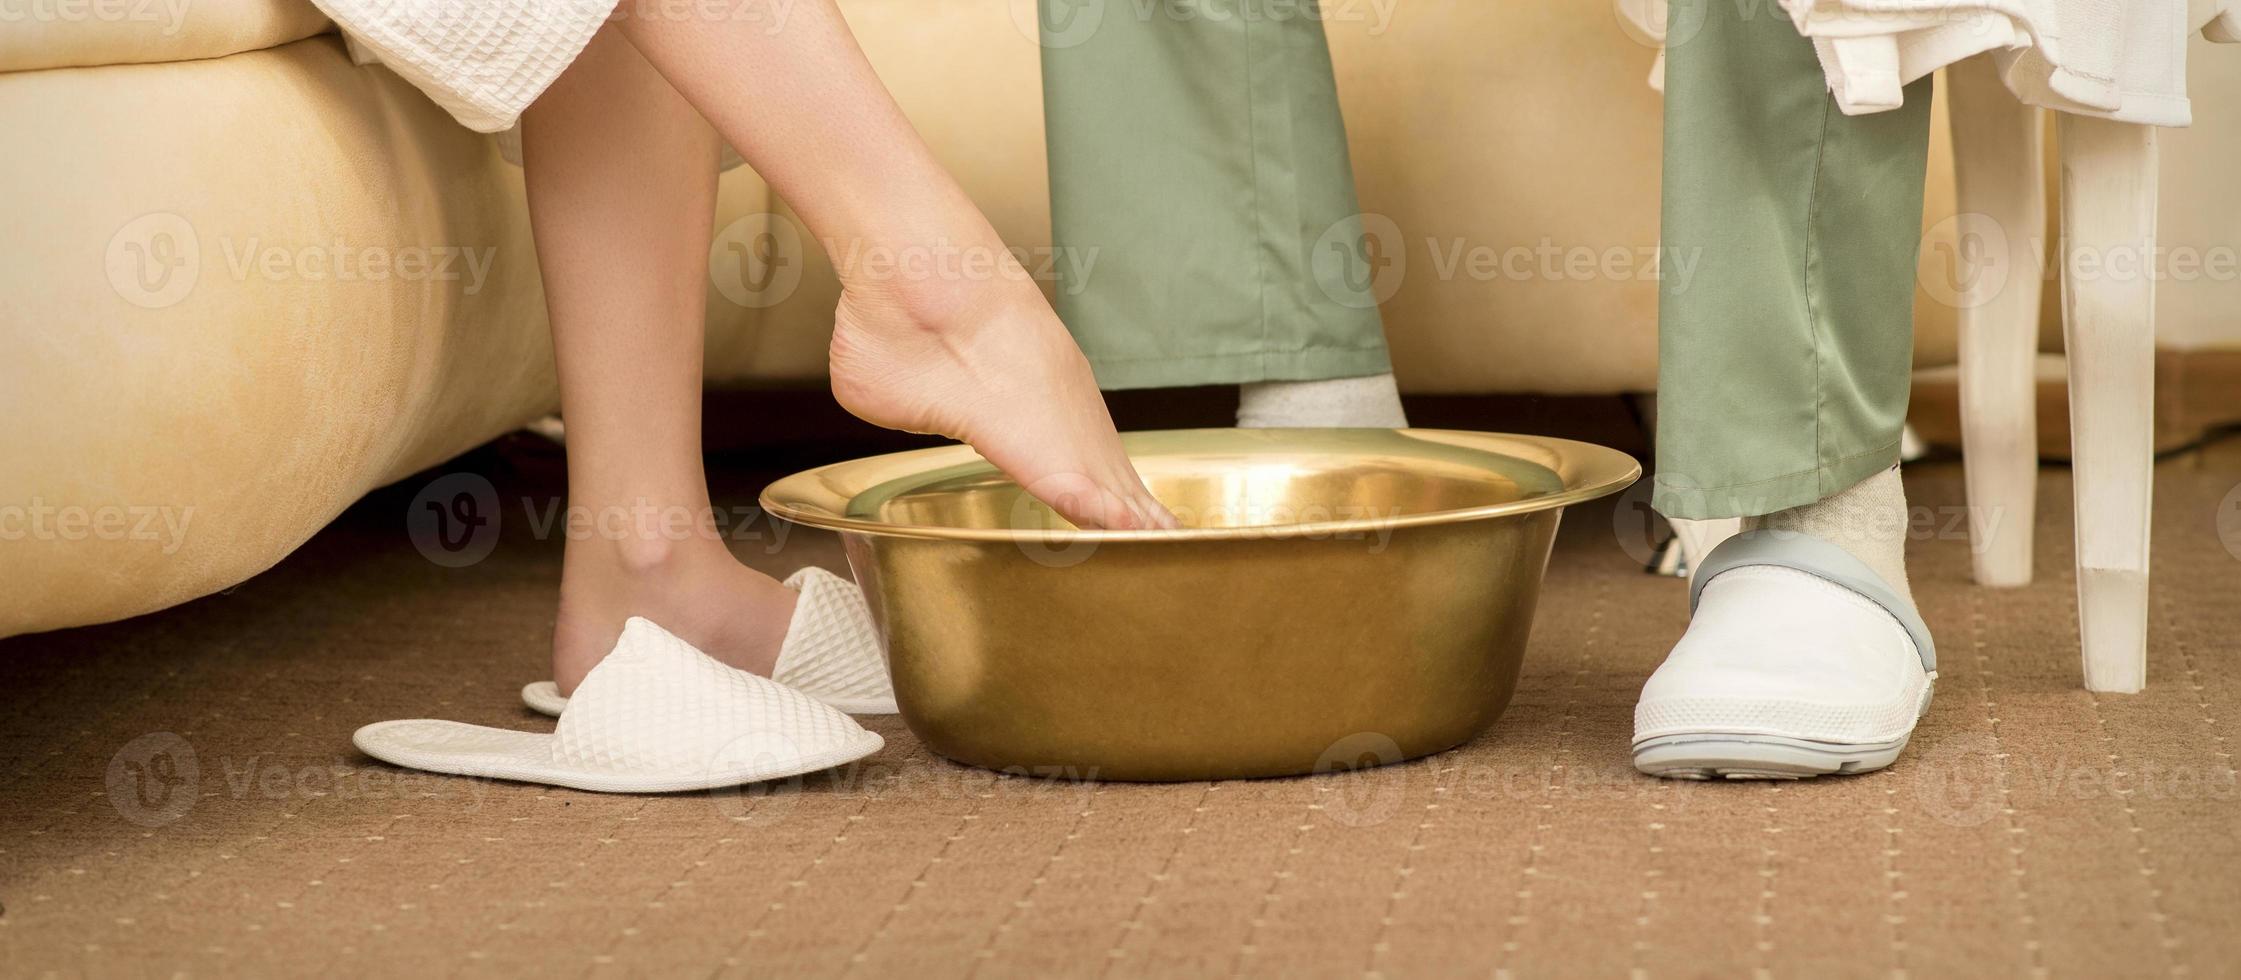 Woman is dipping feet in bowl photo